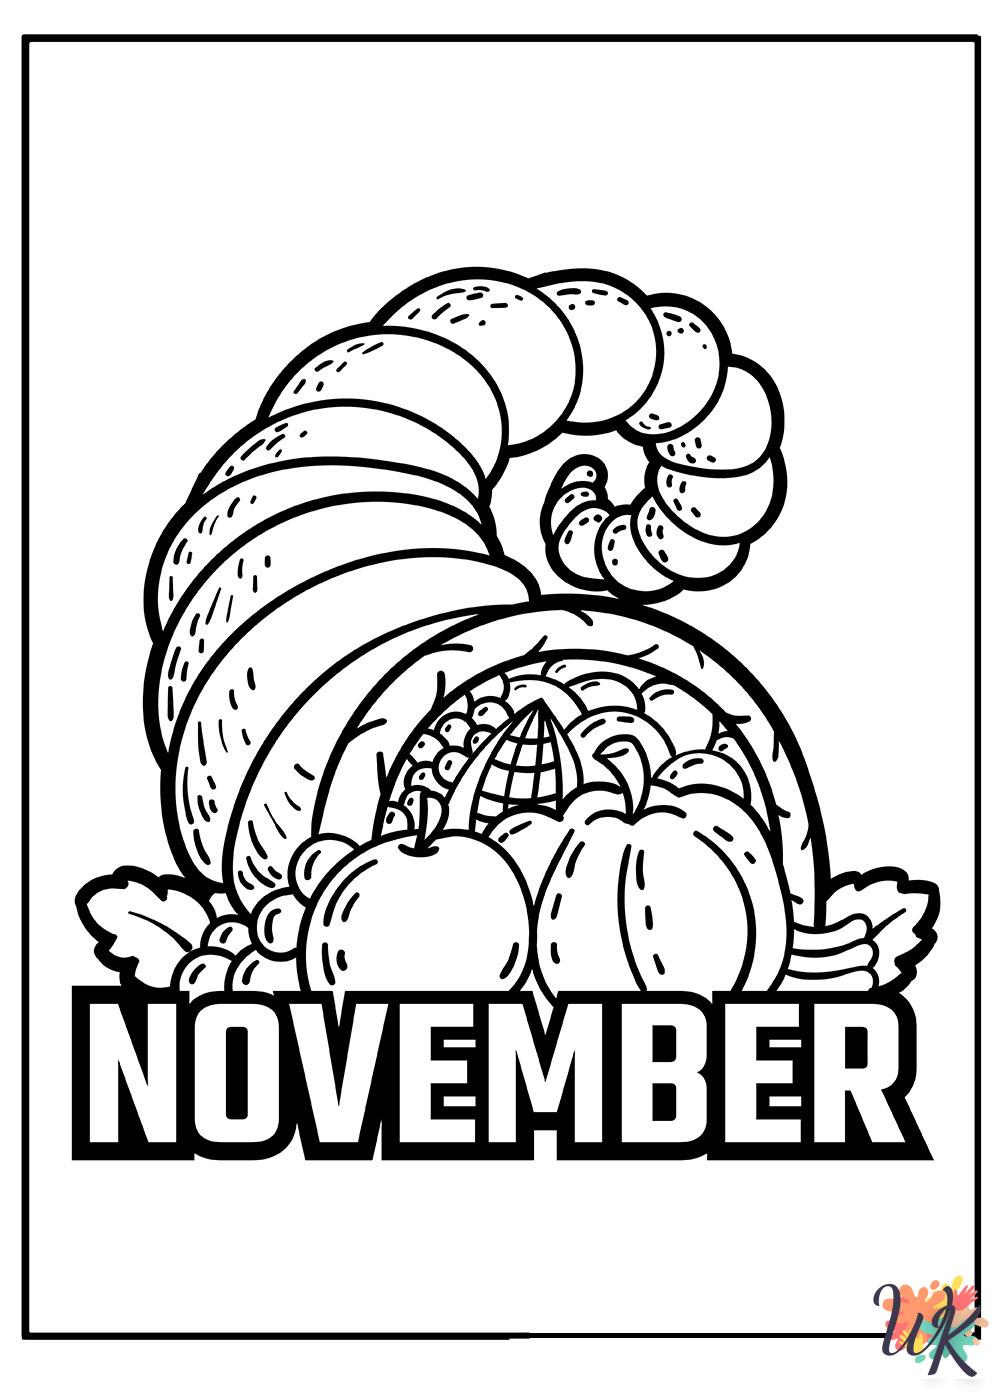 November decorations coloring pages